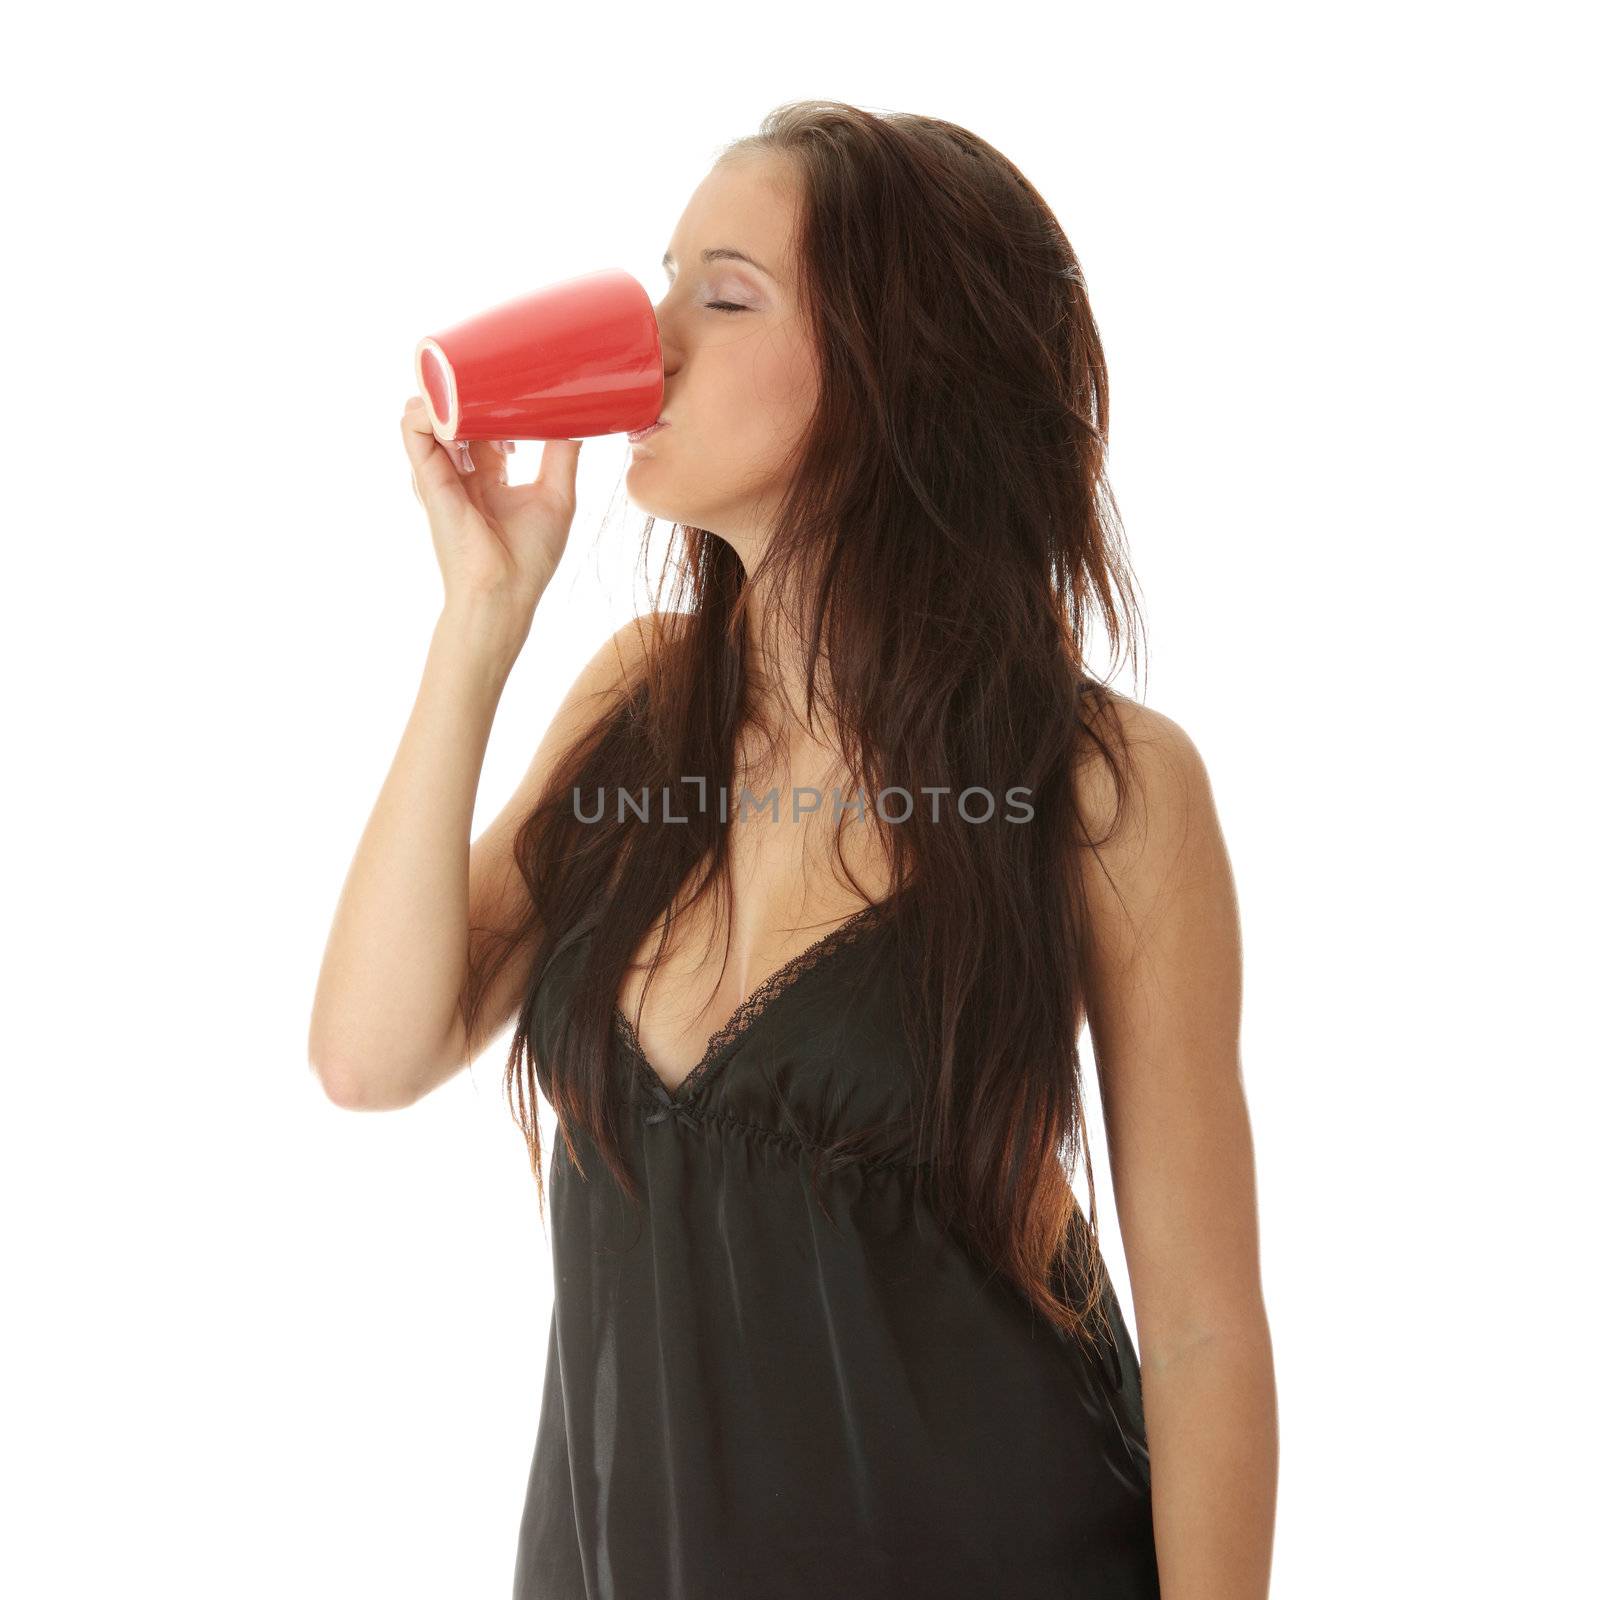 The beautiful young woman drinks morning coffee or tea from red mug